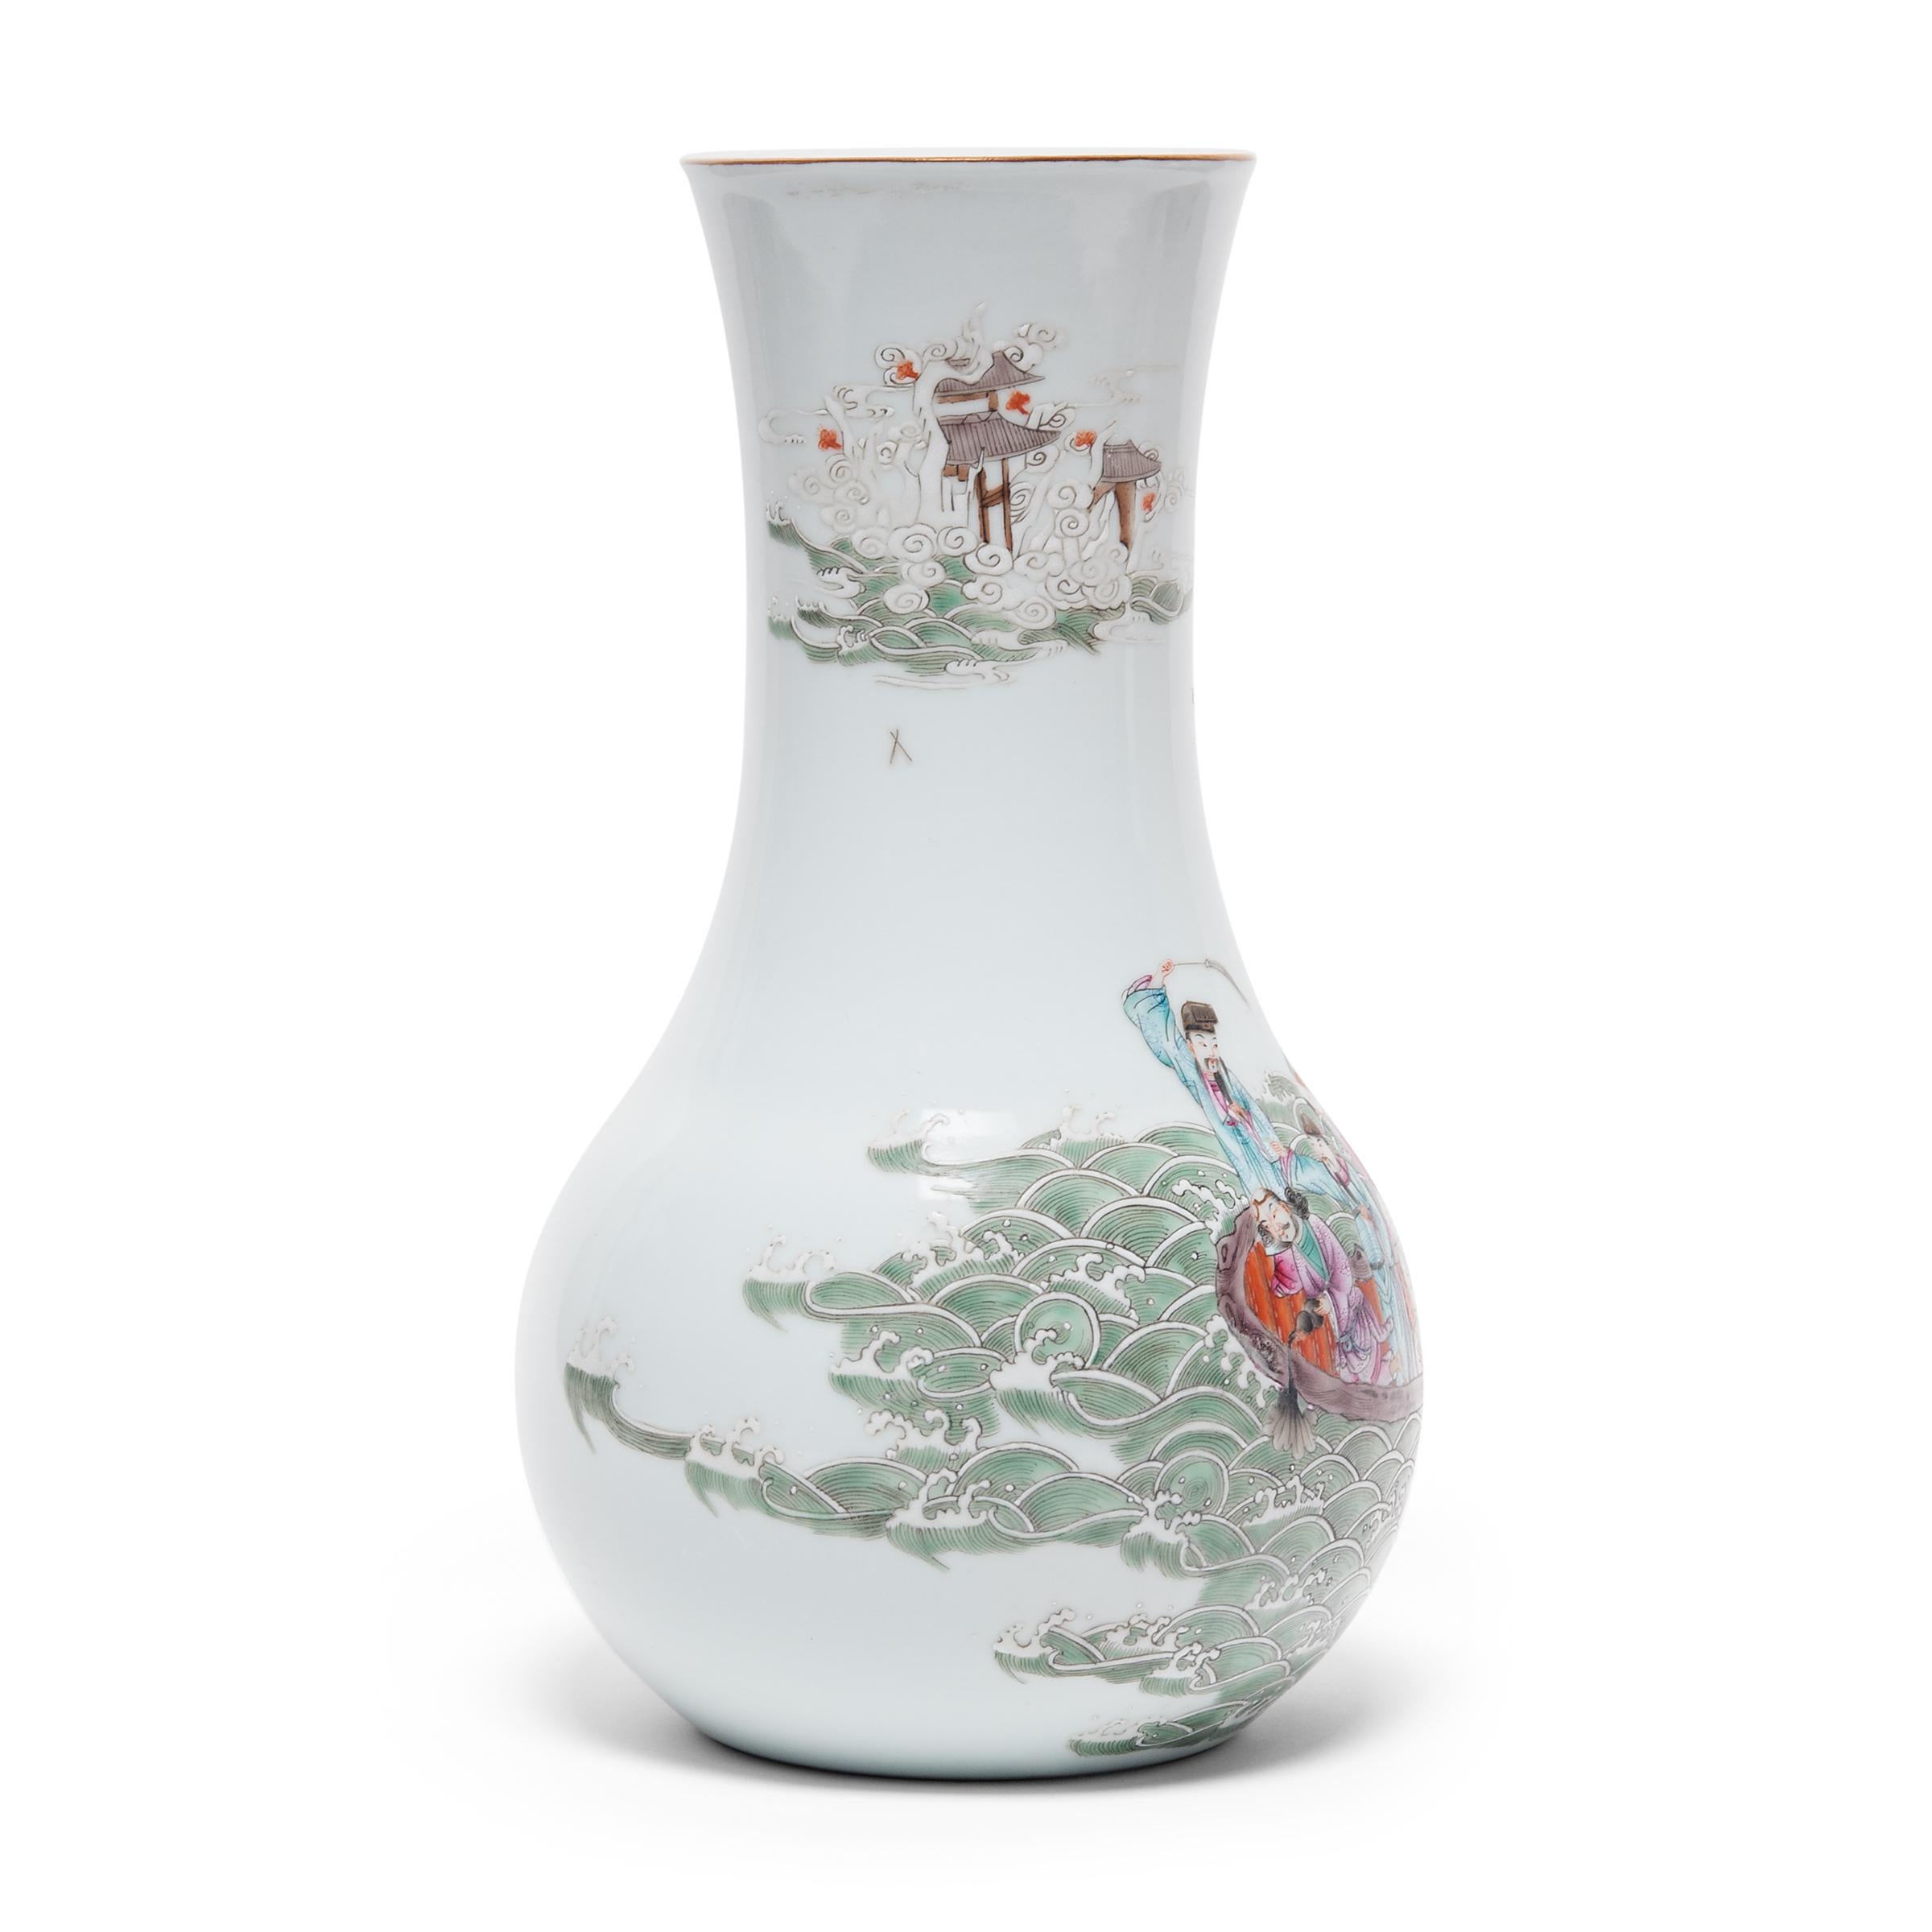 Porcelain Pair of Chinese Famille Rose Vases with Eight Immortals, c. 1900